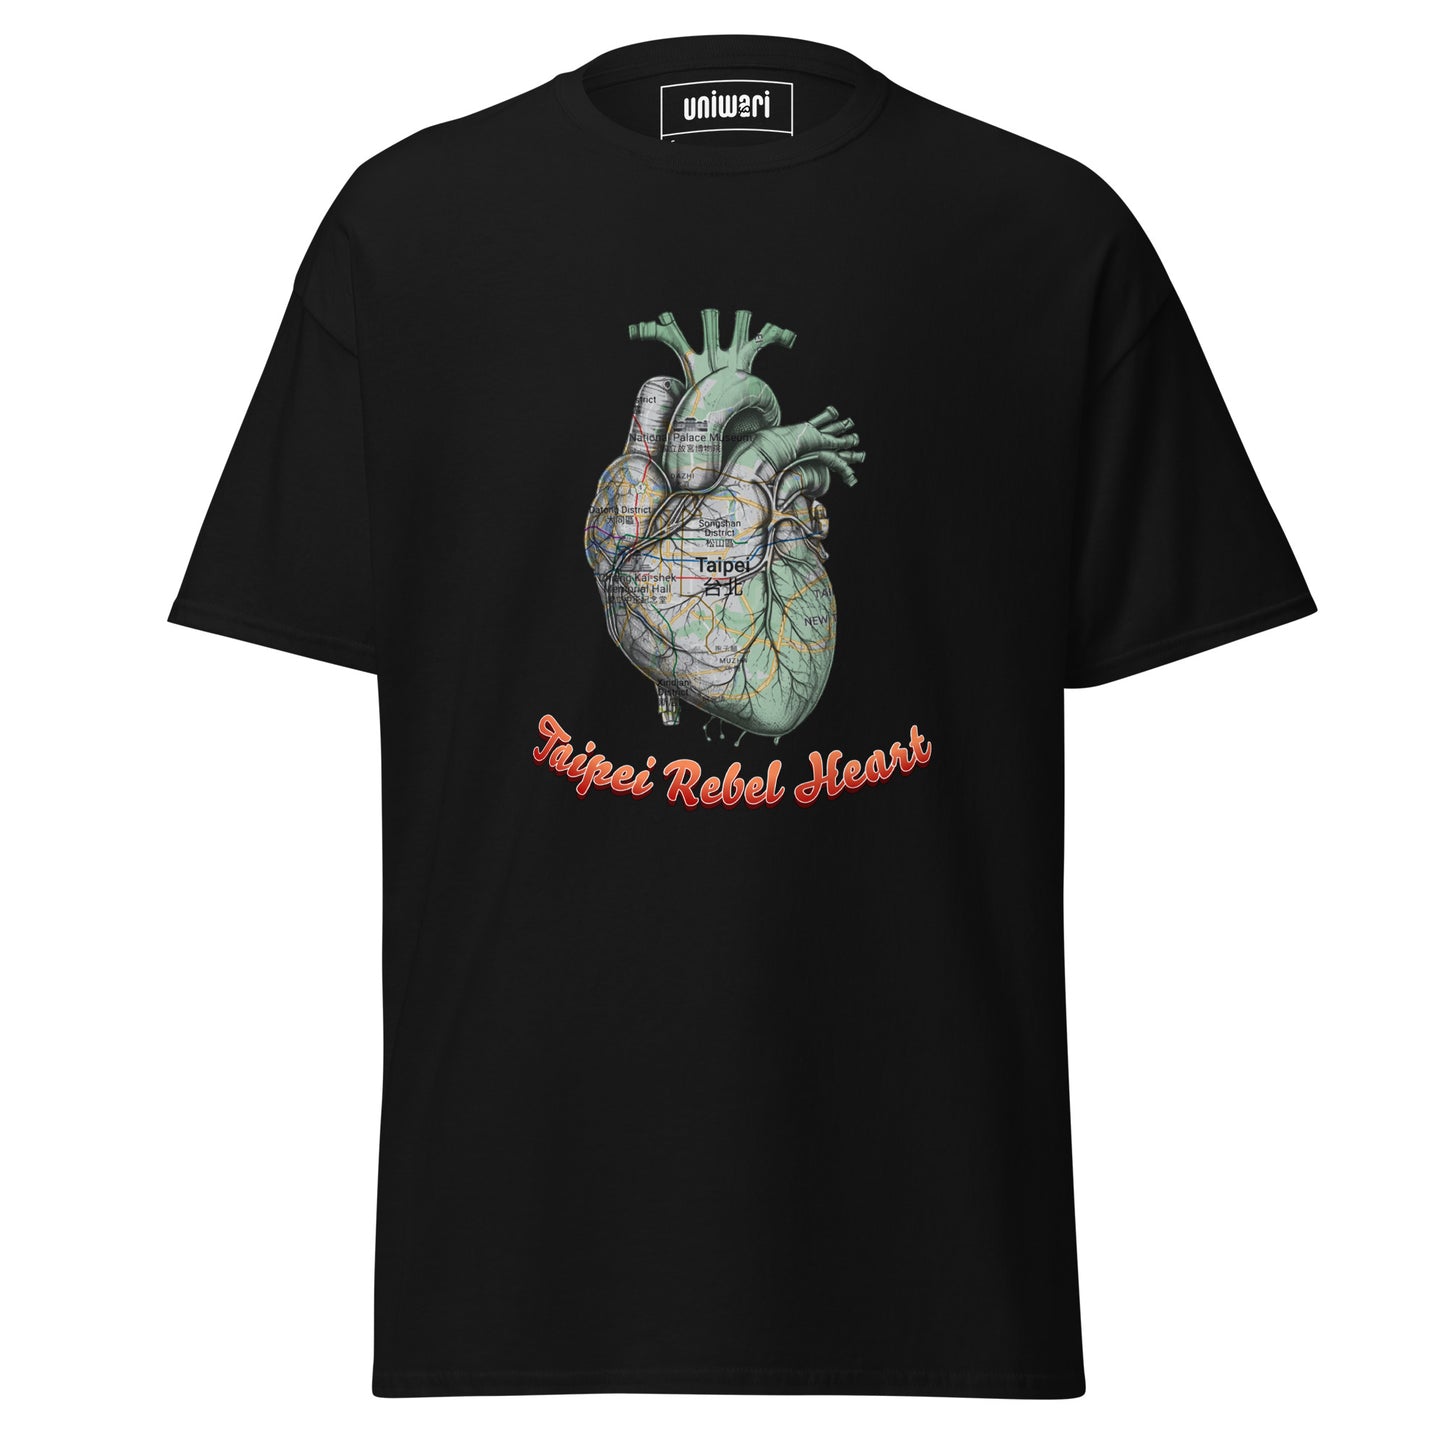 Black High Quality Tee - Front Design with a Heart Shaped Map of Taipei and a Phrase "Taipei Rebel Heart" print